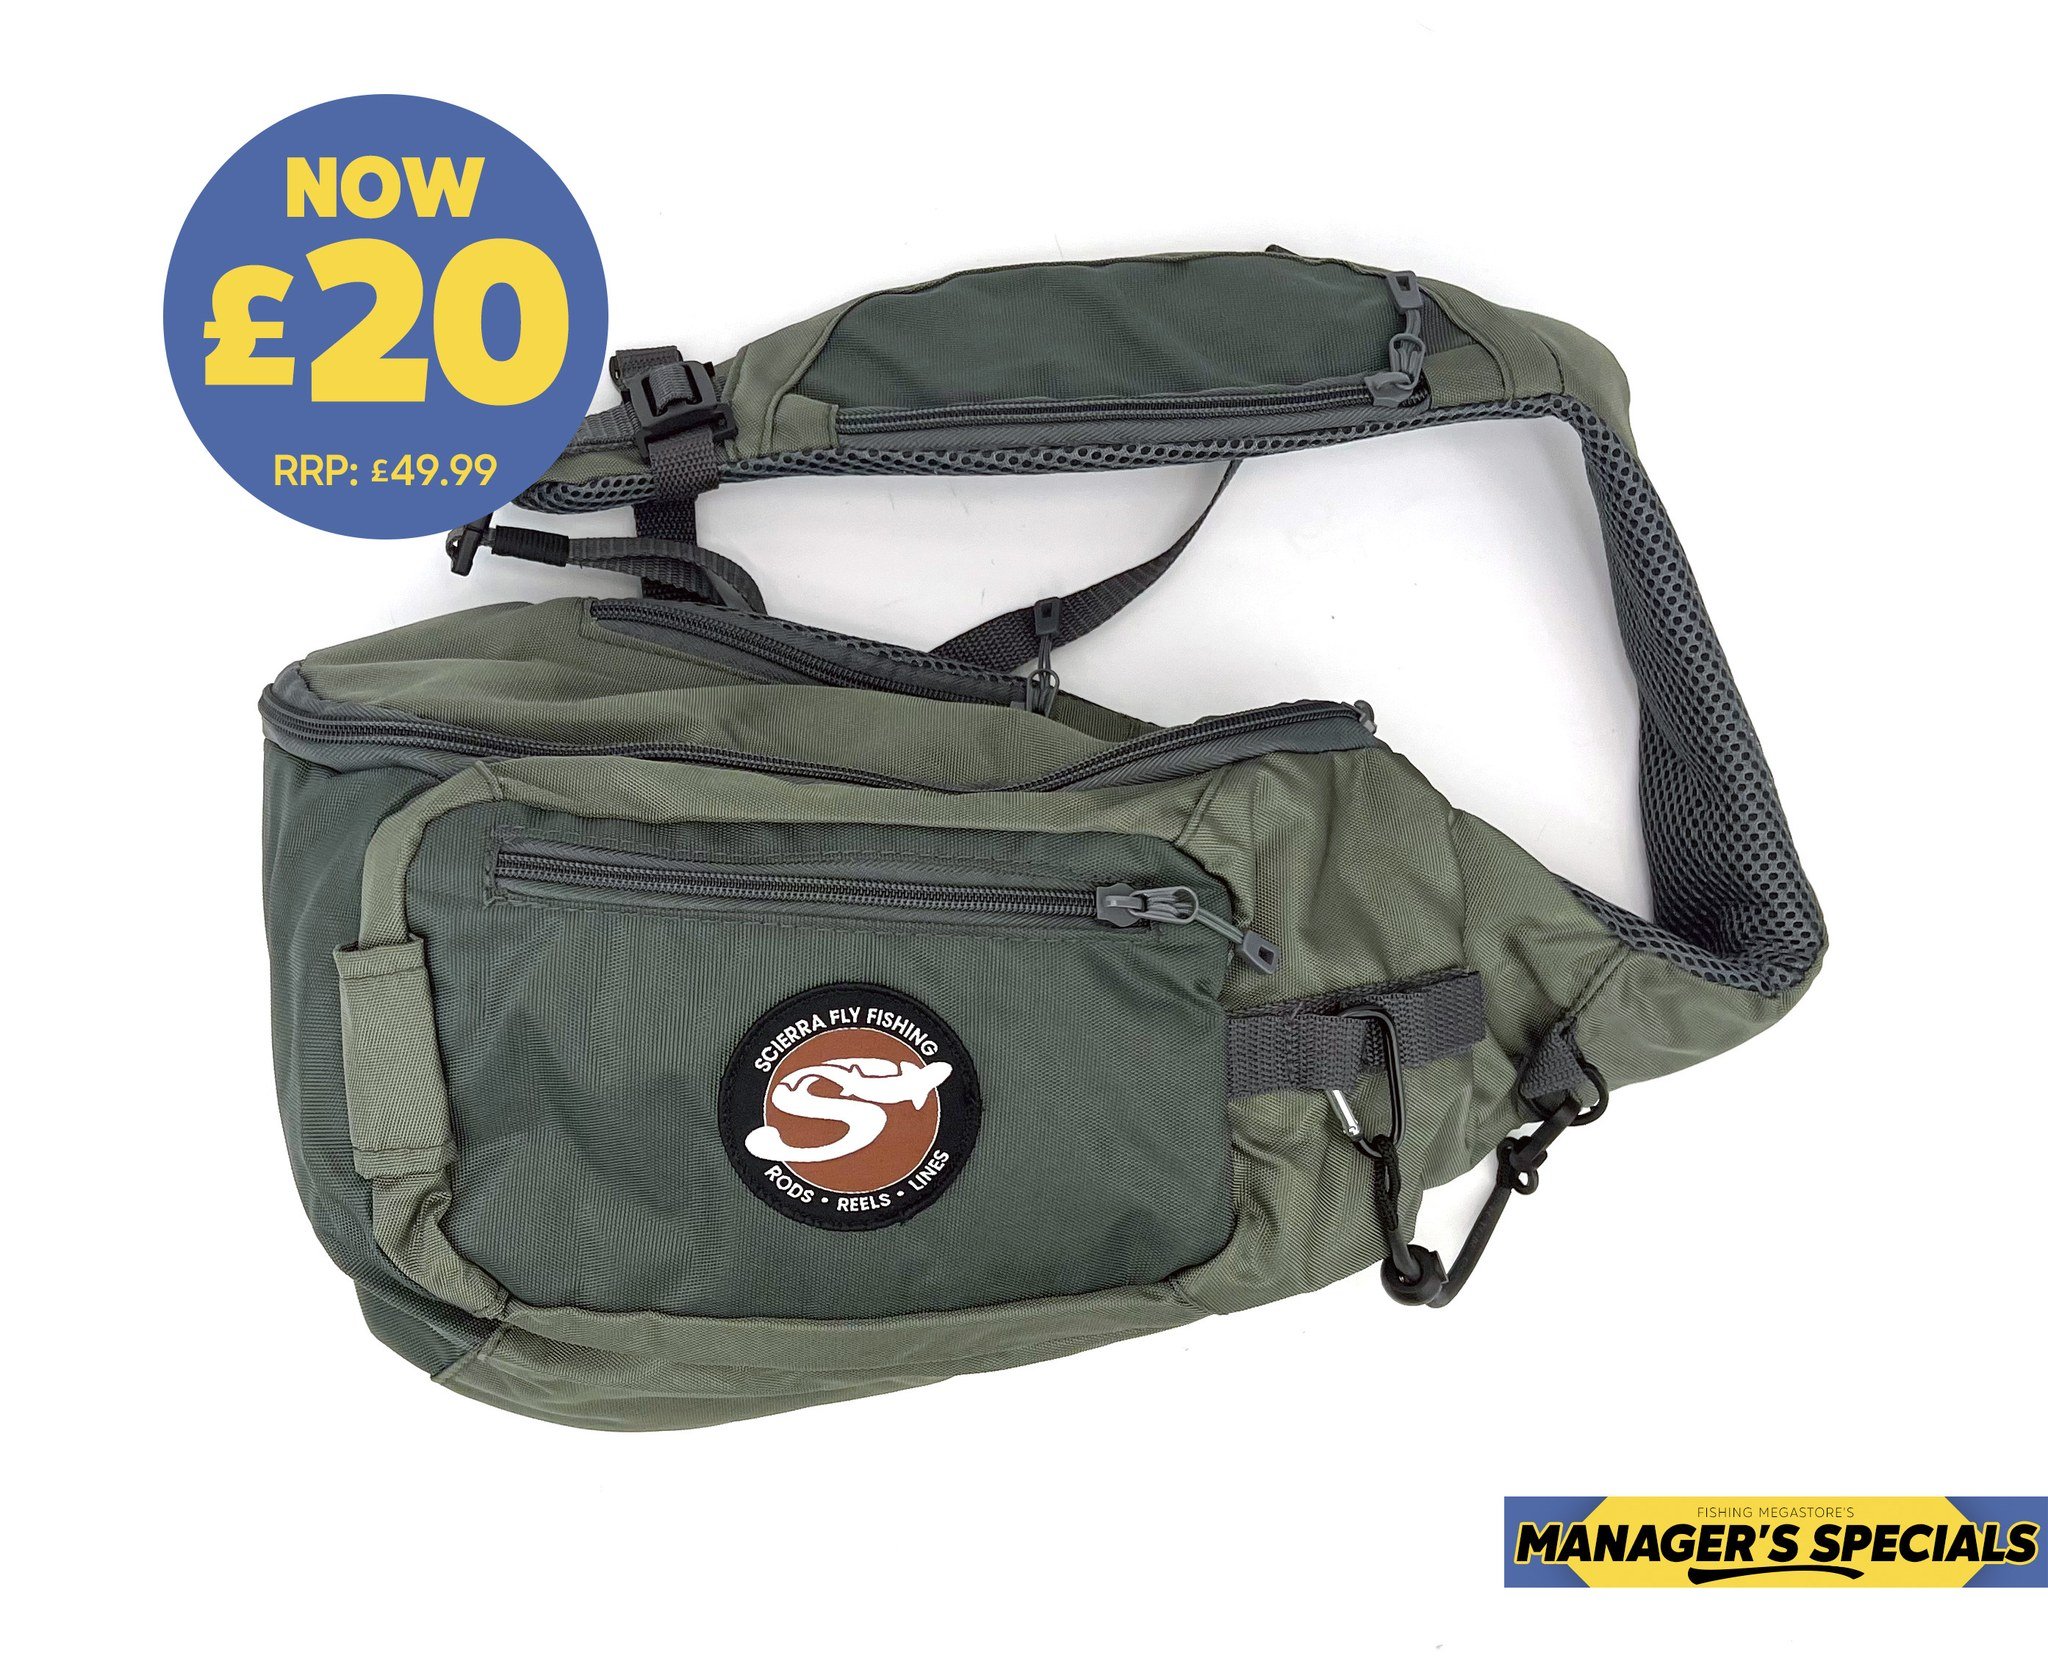 Glasgow Angling Centre on X: 🏷 The Scierra Kaitum XP Sling Bag (left  shoulder) Tough 1680D with water-resistant PU coating, handy compartments,  tool webbing points, and padded comfort for all-day wear. Perfect